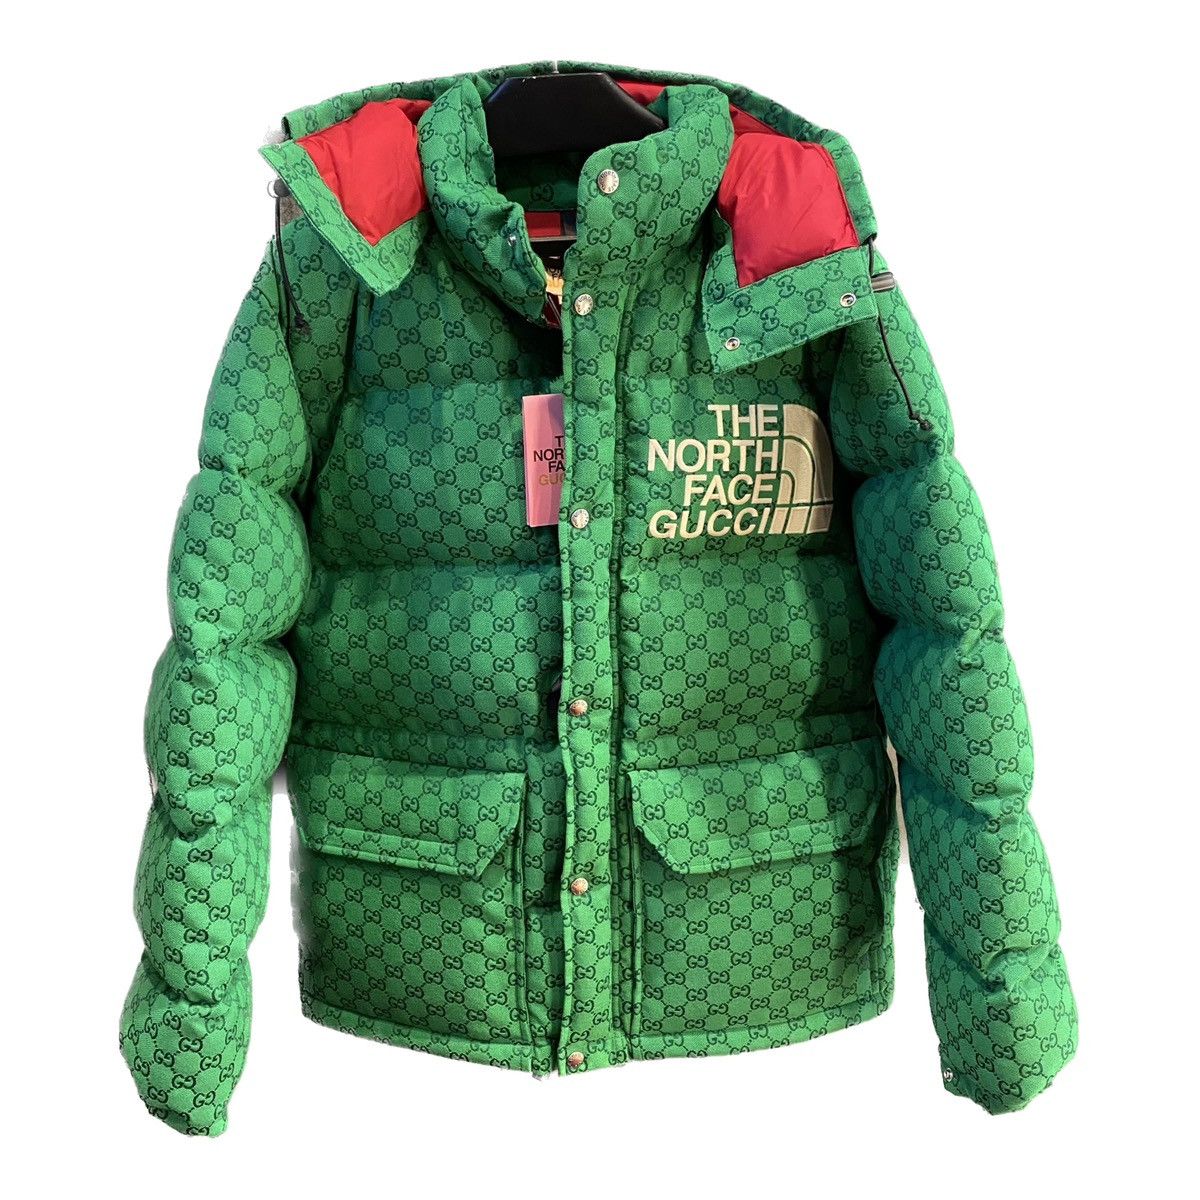 Gucci North Face Gucci Puffer Jacket in Large | Grailed